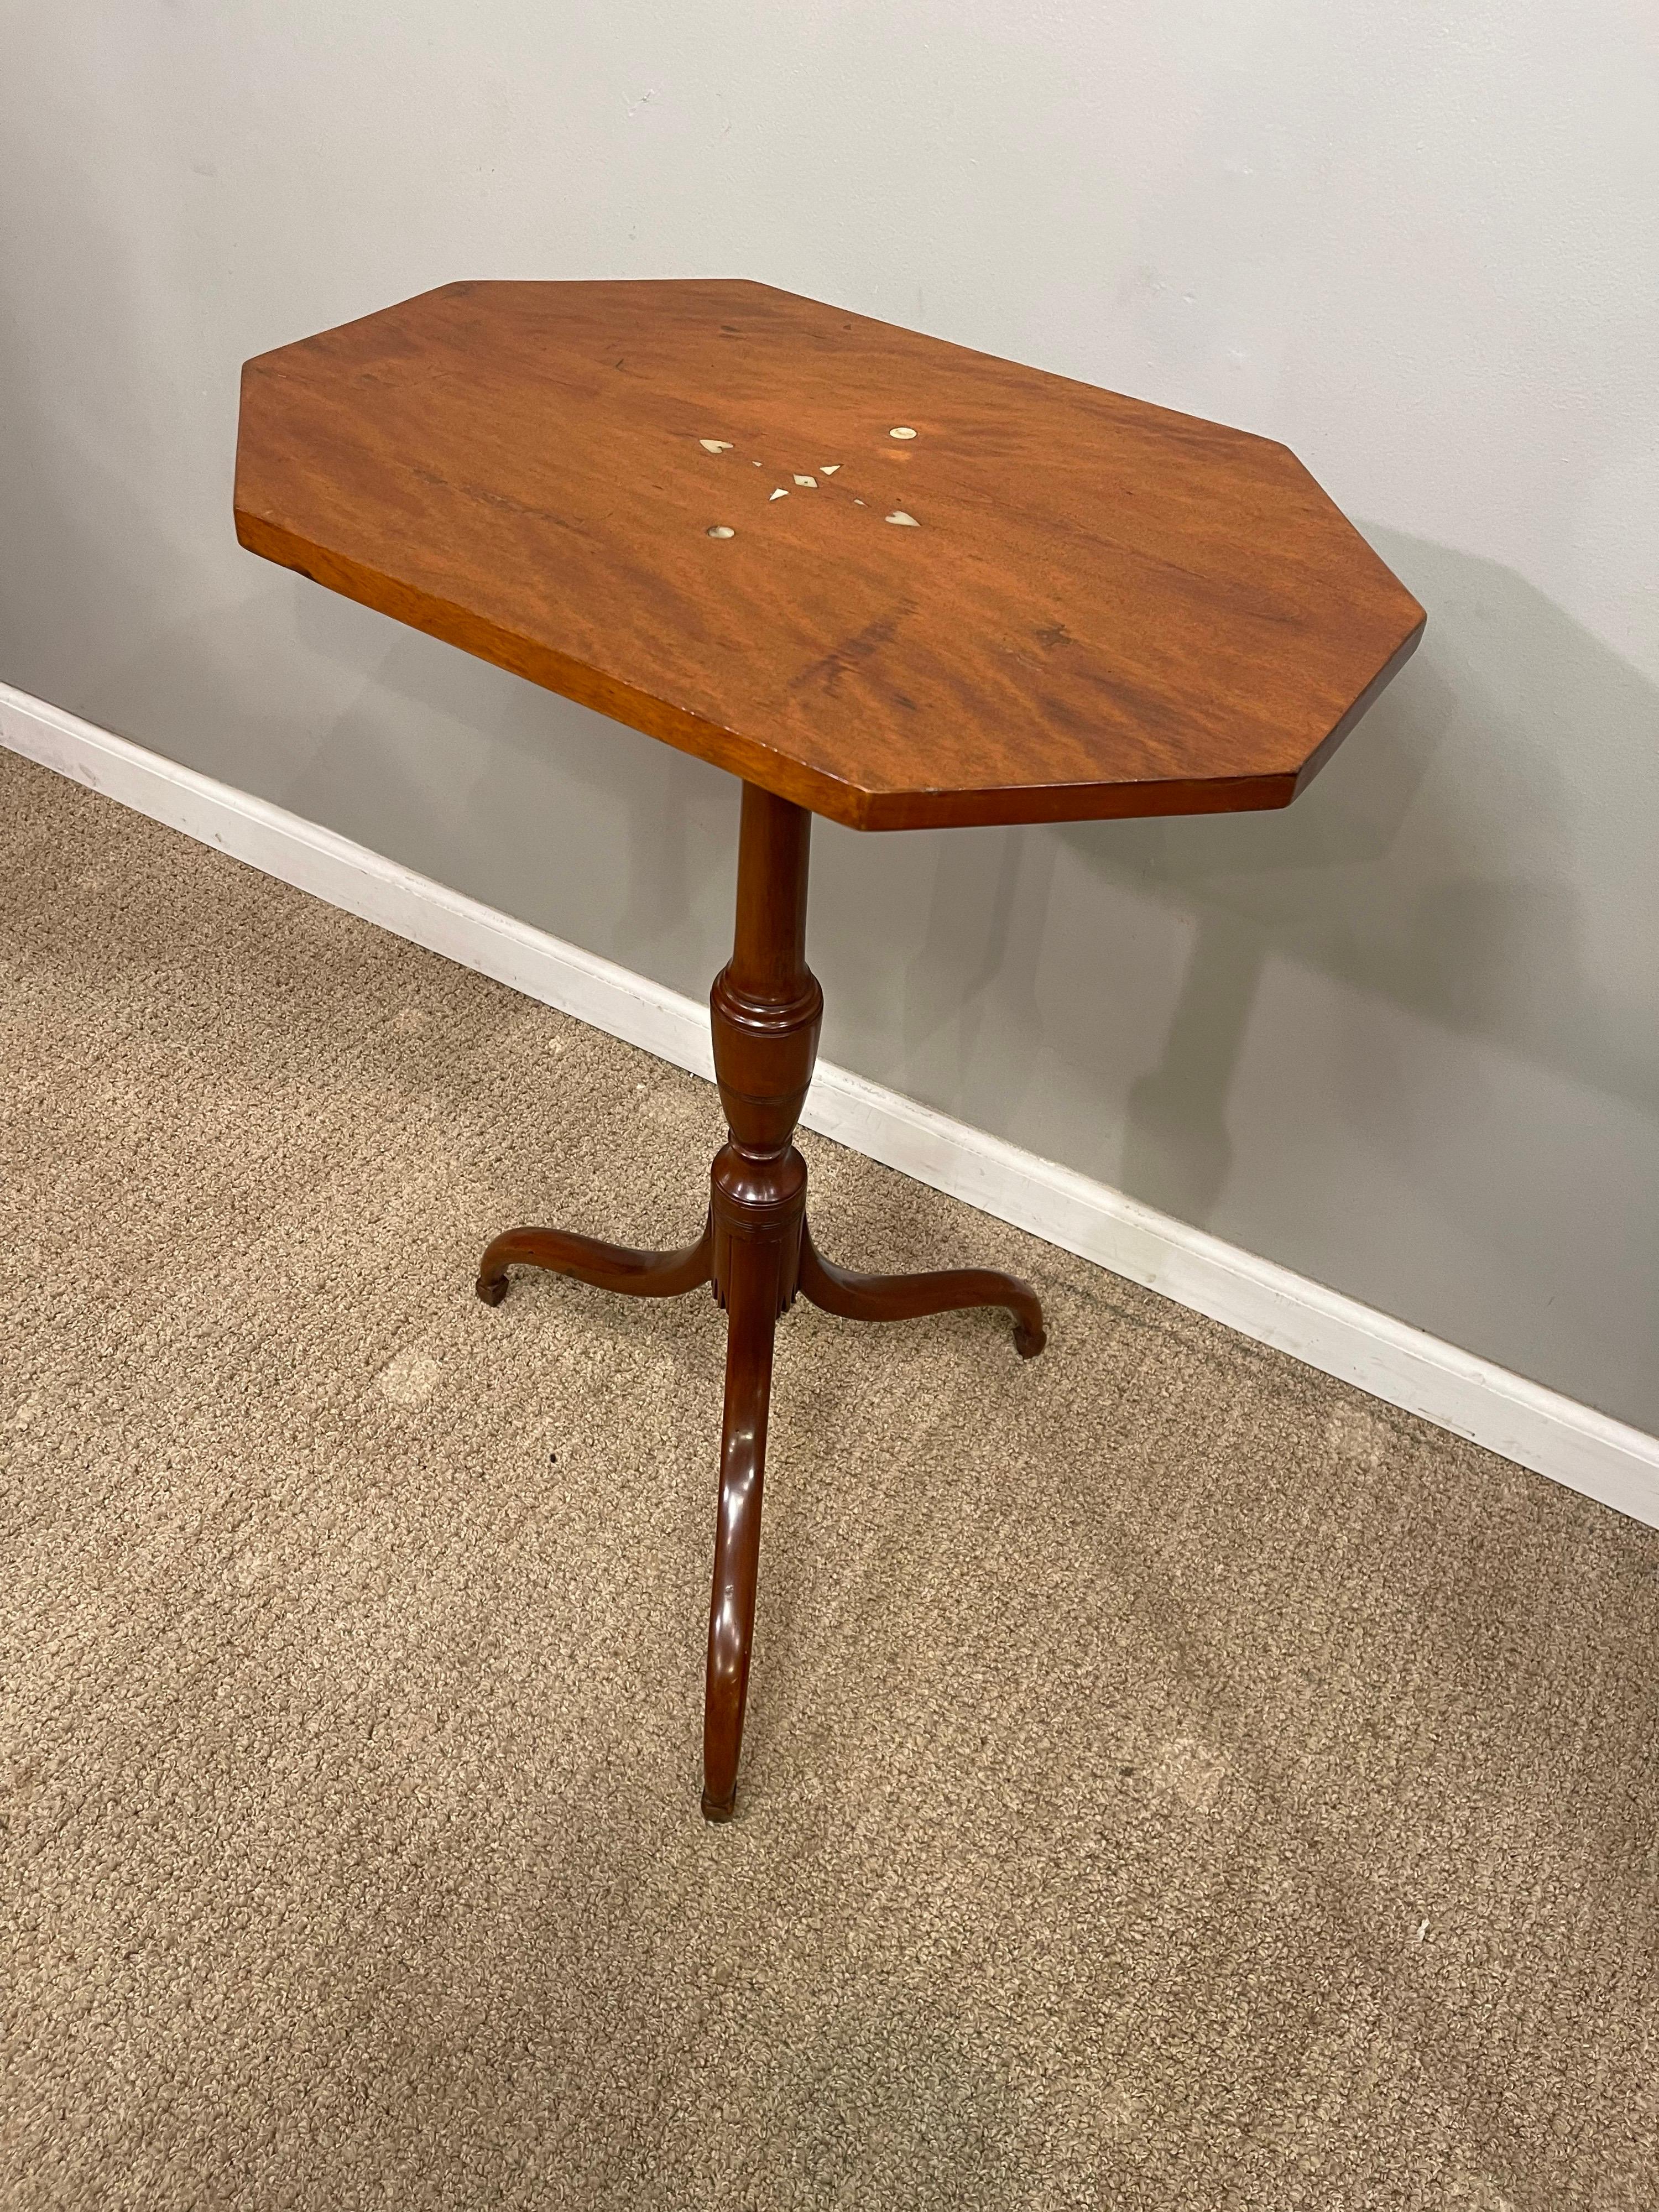 Polished Federal Tiger Maple Tripod Table, American, Early 19th Century For Sale